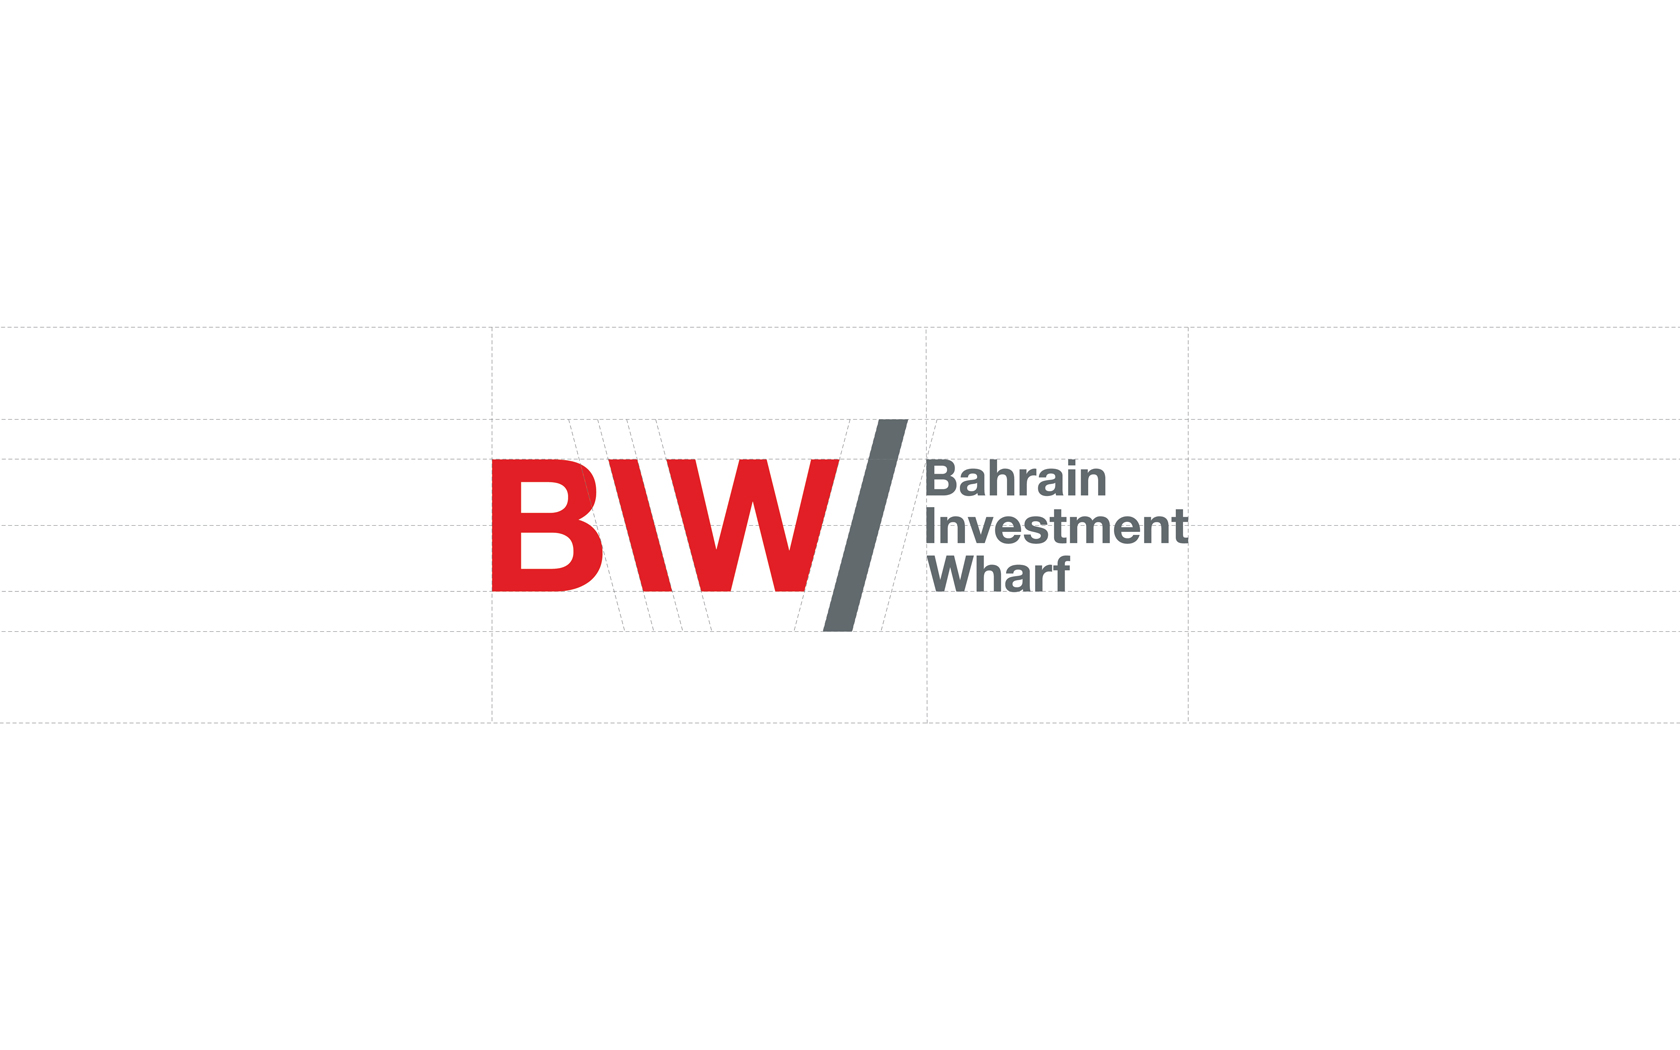 BIW. Brand logo in vertical lockup with architectural grid